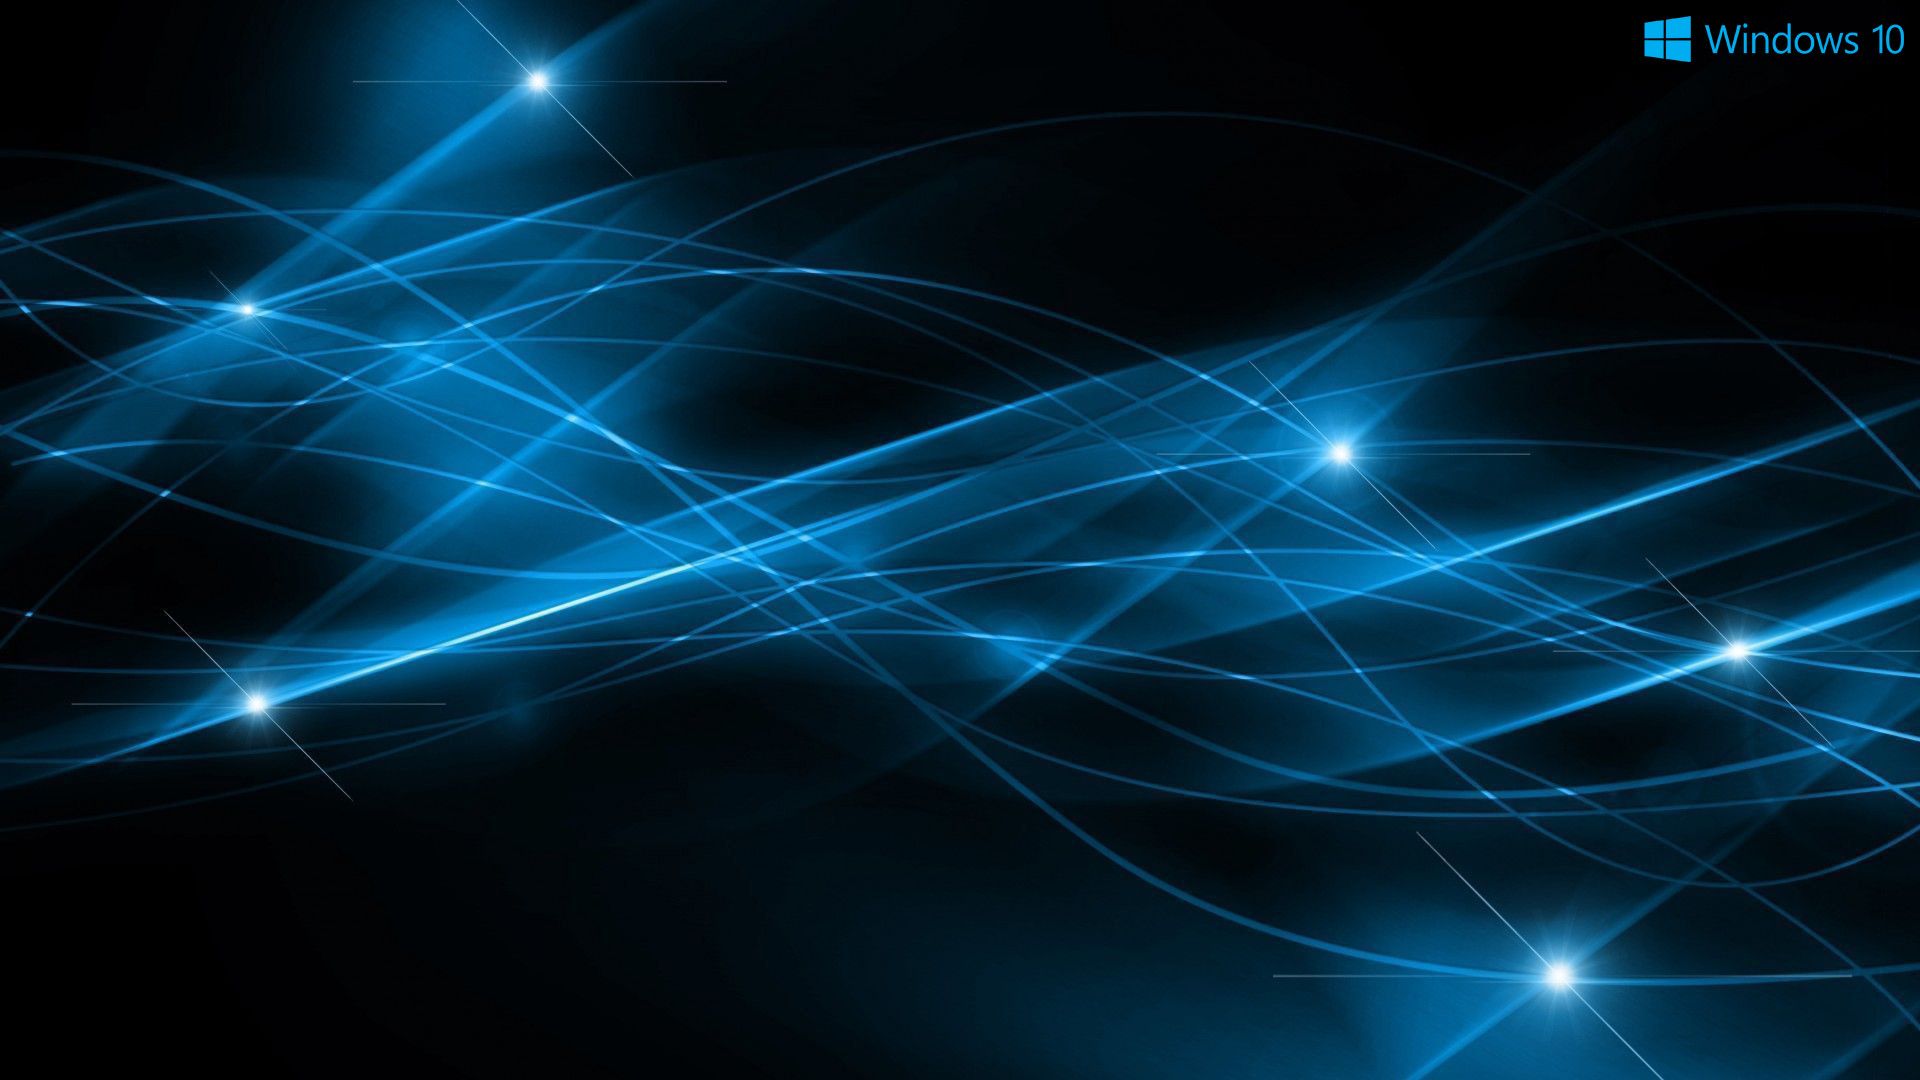 1920x1080 ... Abstract Windows 10 Background and Logo with Dark Blue Lights